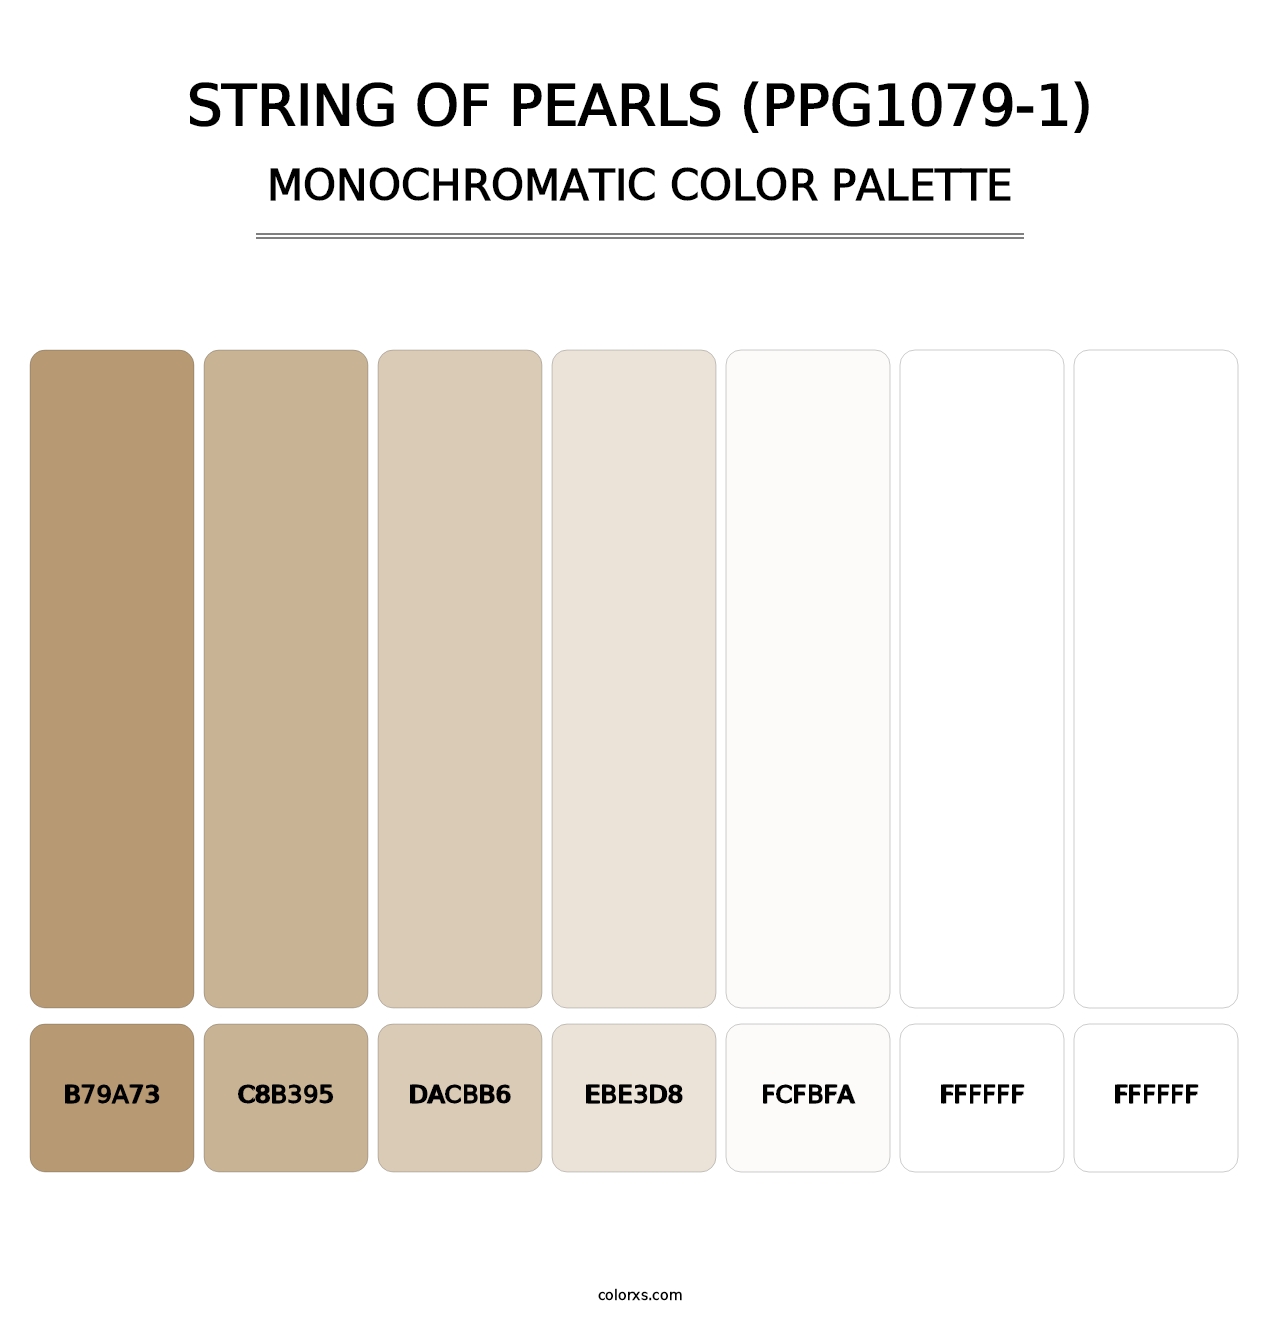 String Of Pearls (PPG1079-1) - Monochromatic Color Palette